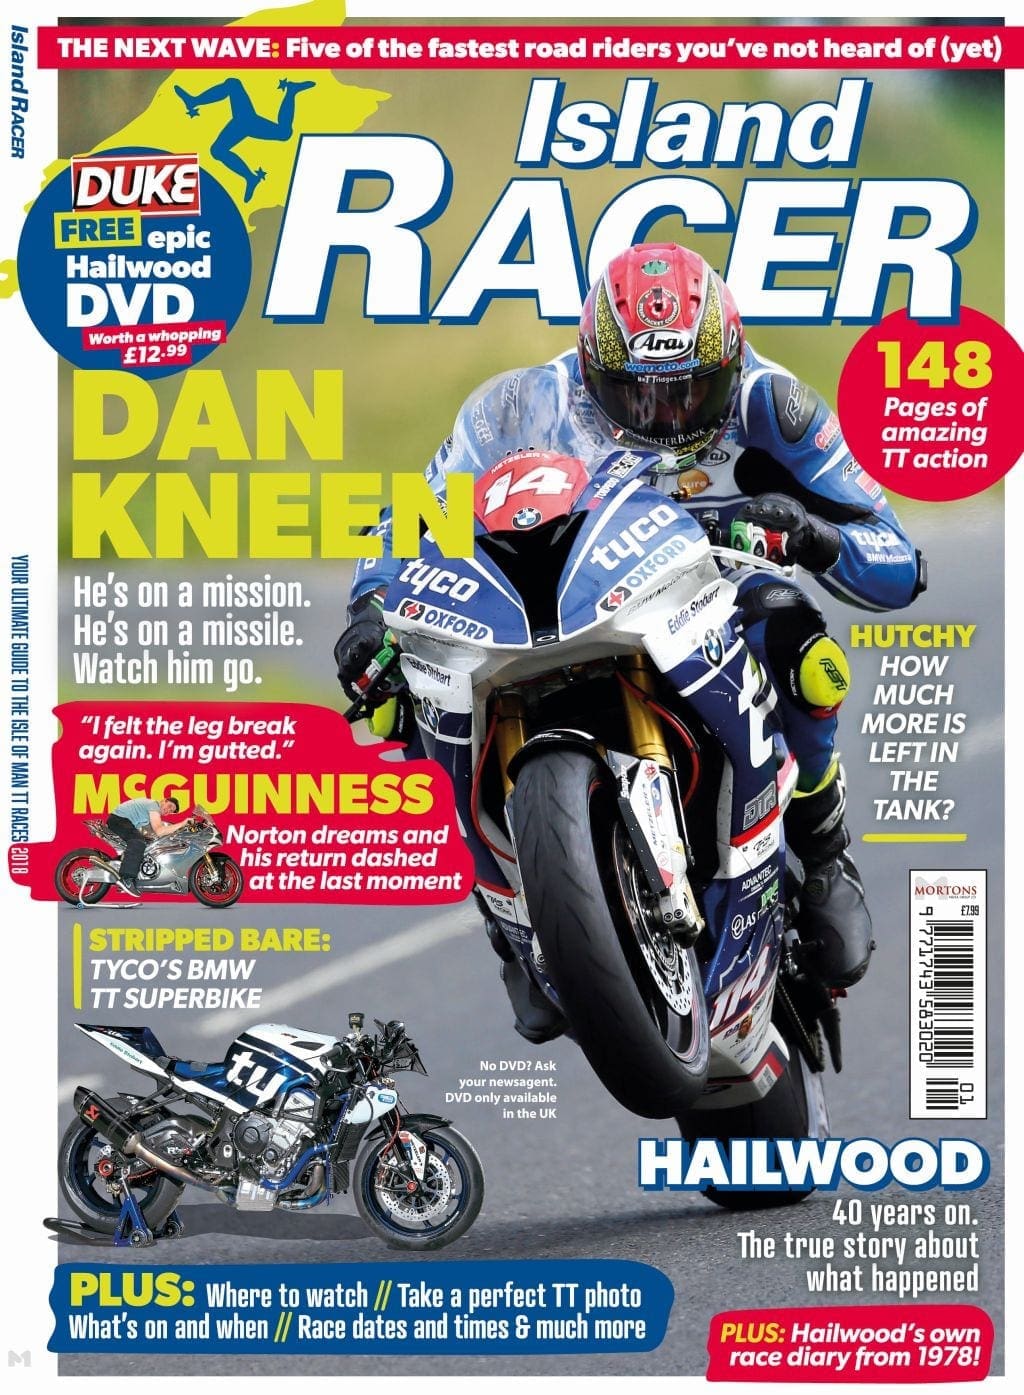 Isle of Man TT 2018: Island Racer annual OUT NOW! The BEST Isle of Man TT publication of the year has hit the shops. Be quick before it sells out (again)